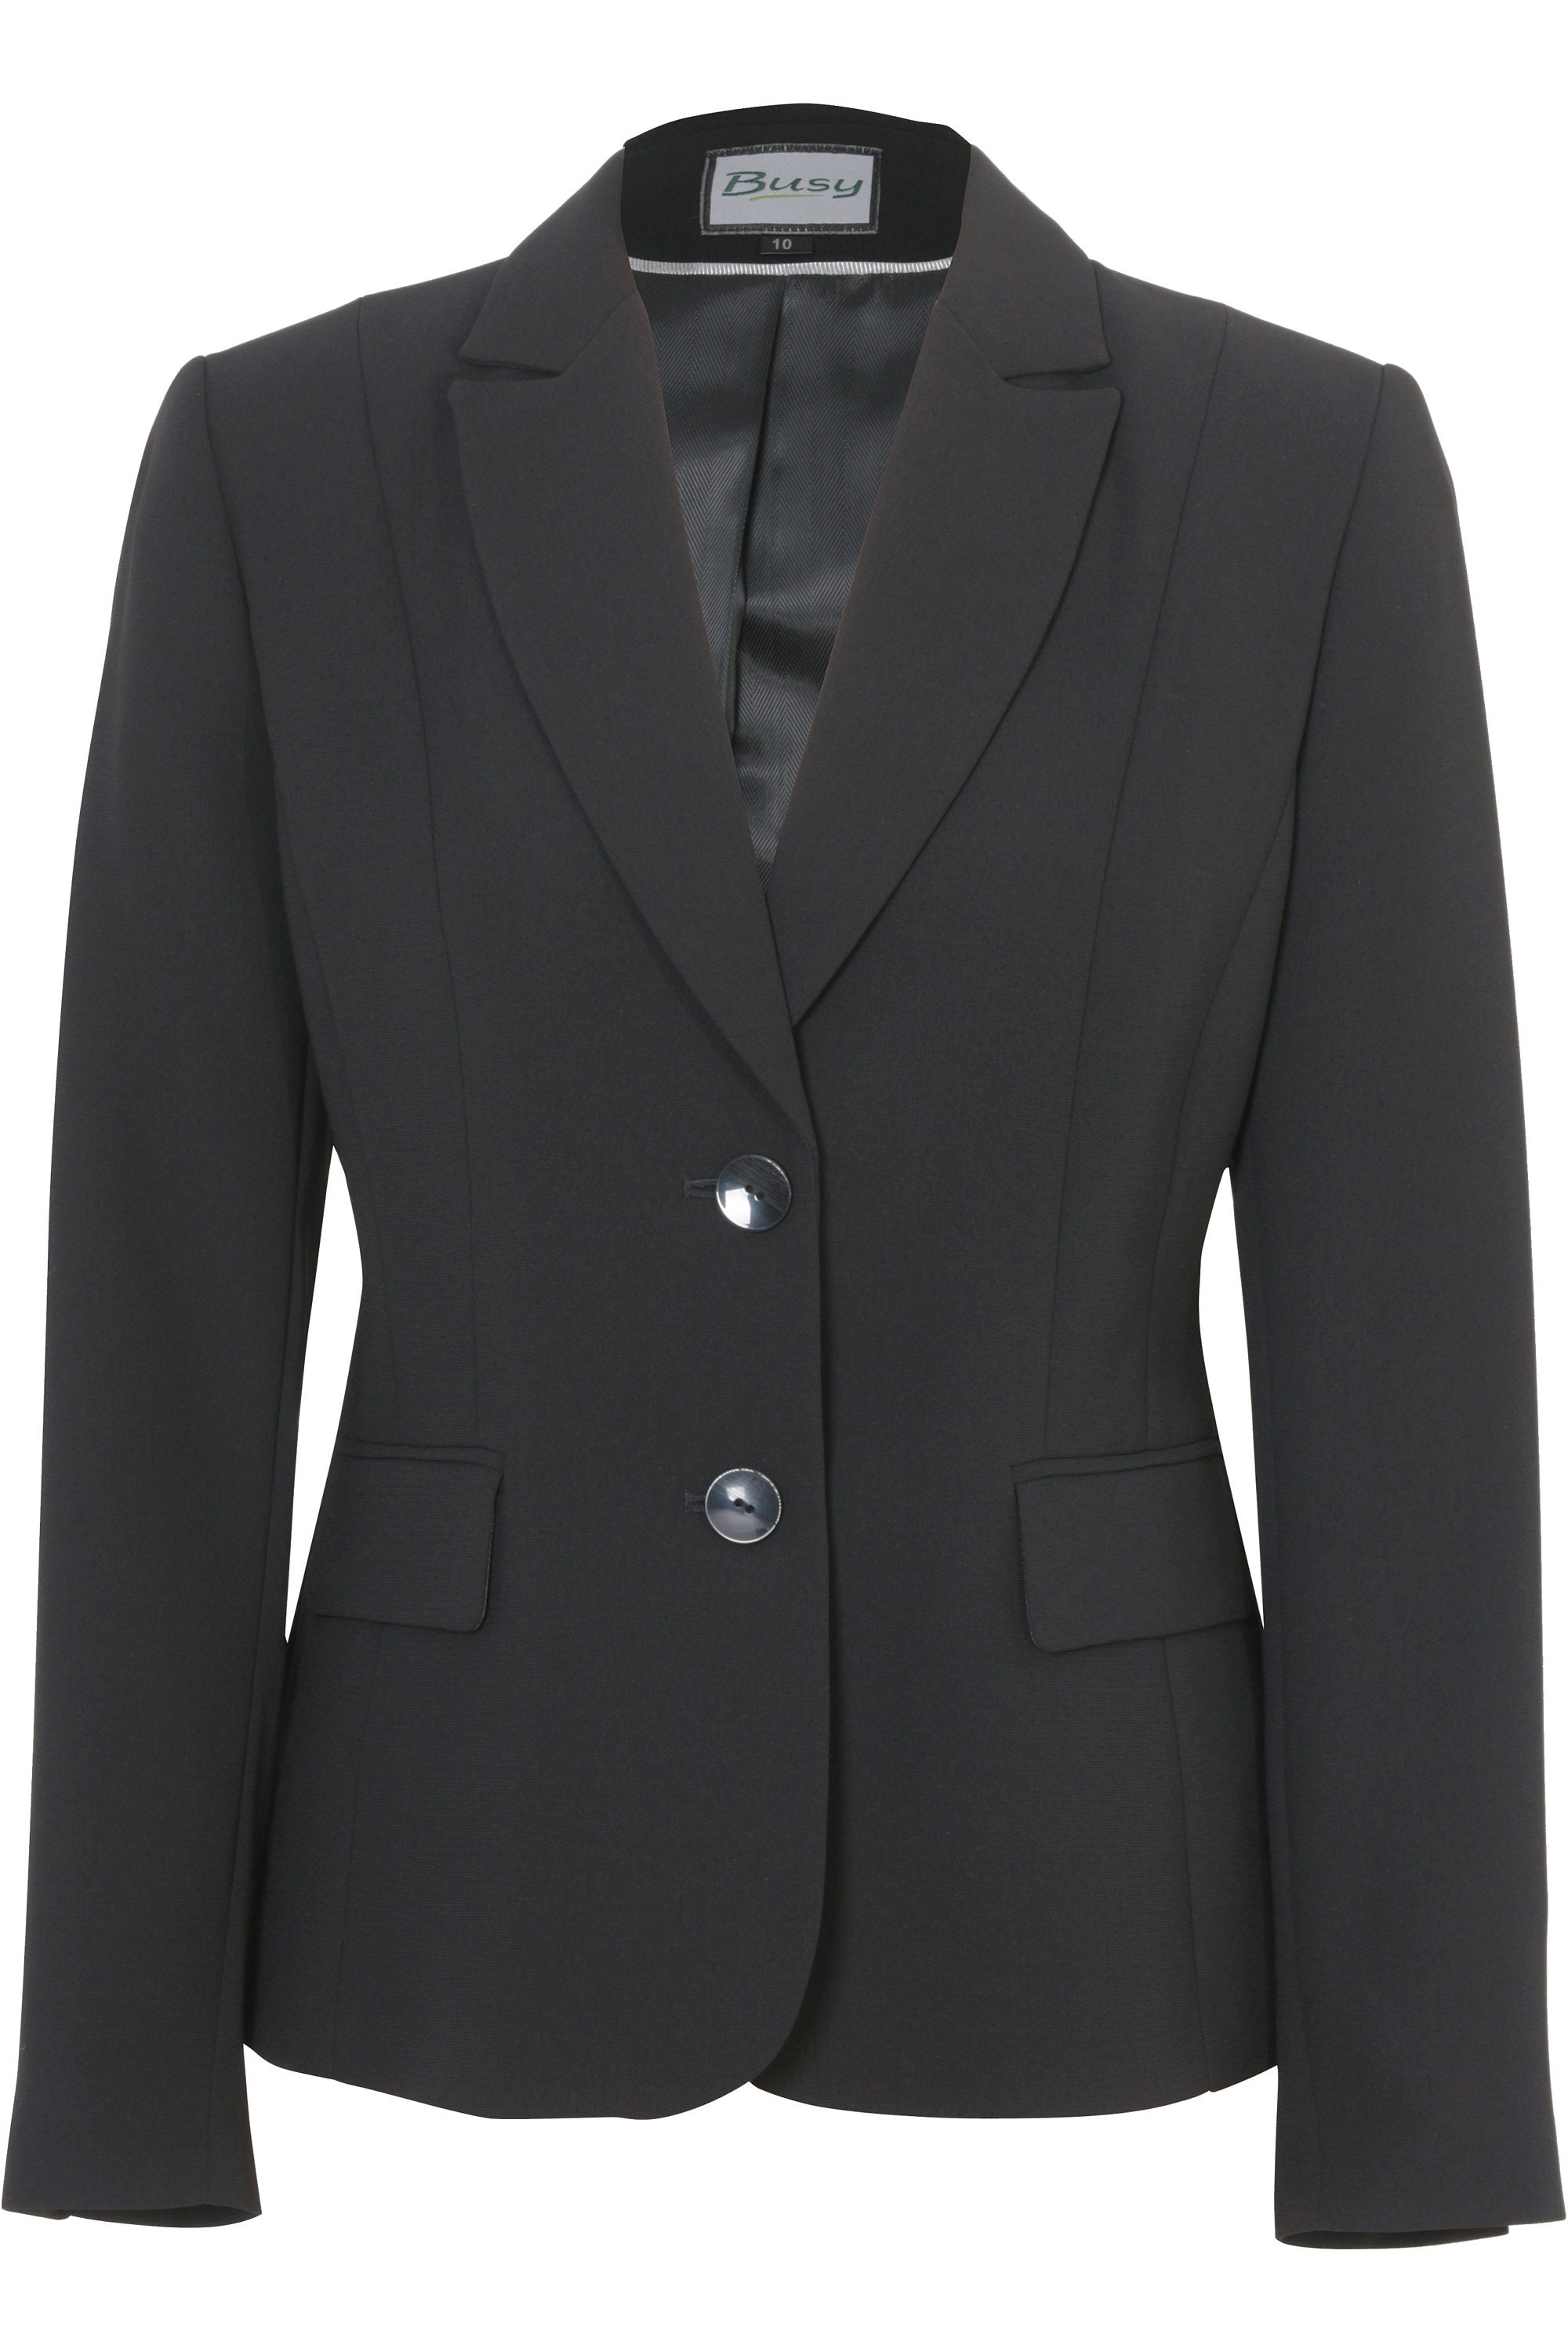 Busy Women's Suit Jacket Blazer in Brown, Black, Navy, Light Cream and ...